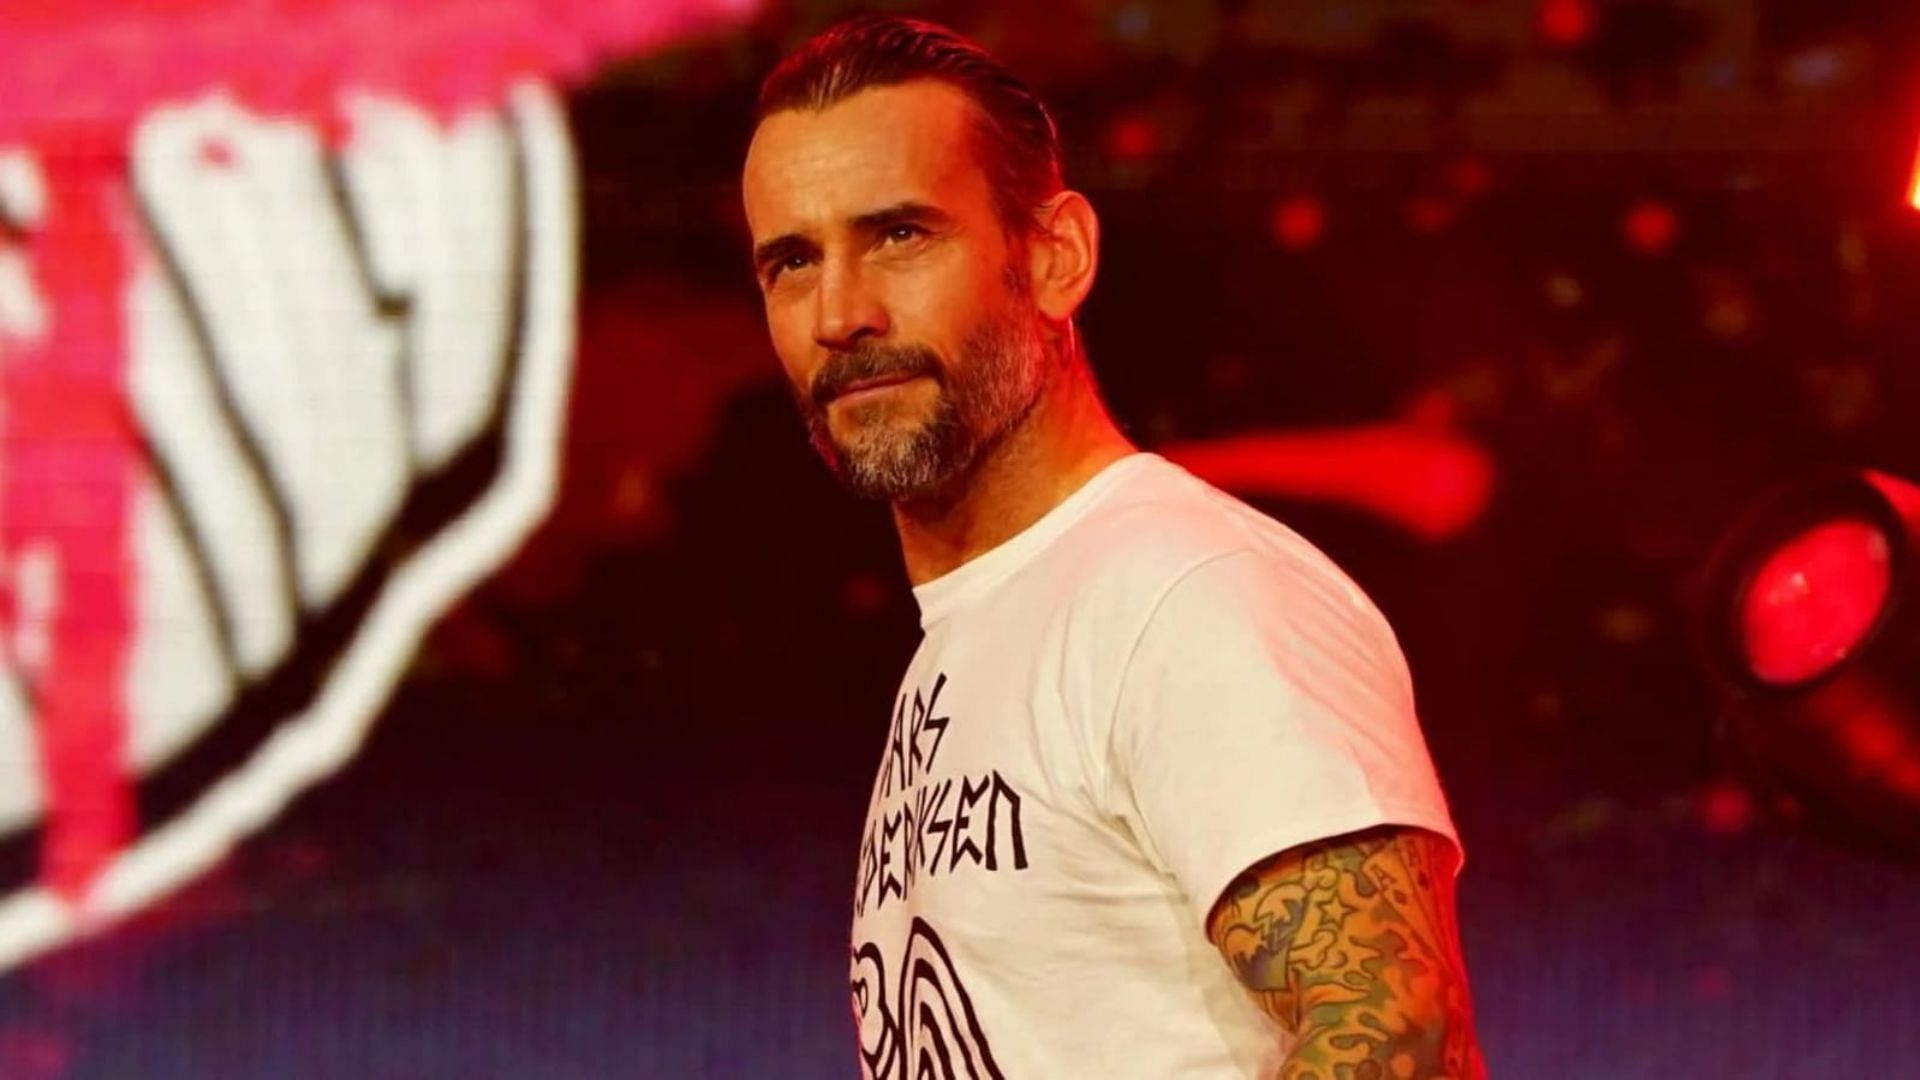 CM Punk has certainly changed ahead of his rumored AEW return